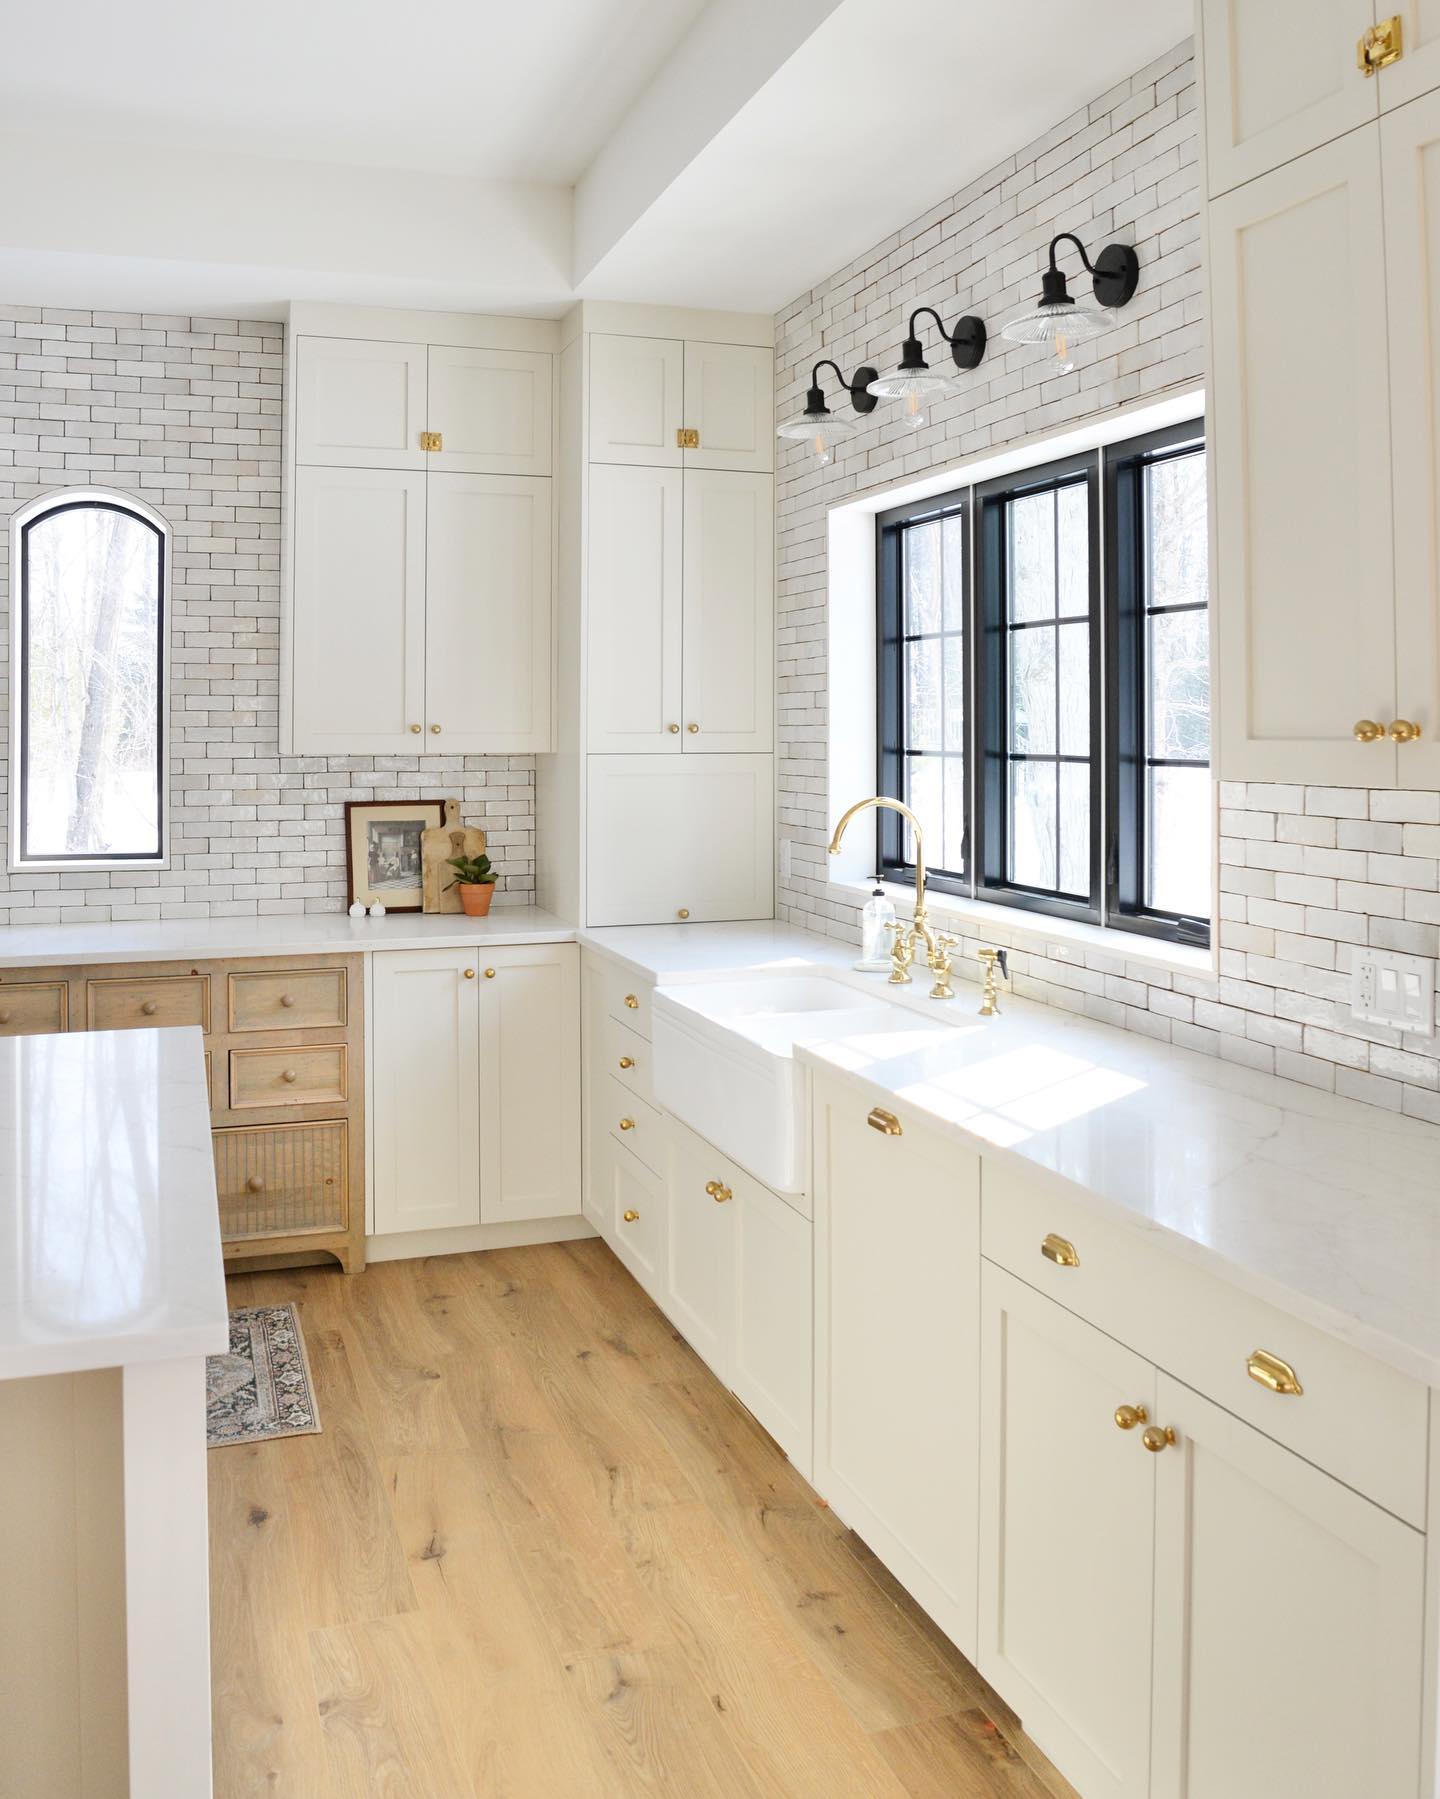 How to Remodel Your Kitchen With Custom Kitchen Cabinets